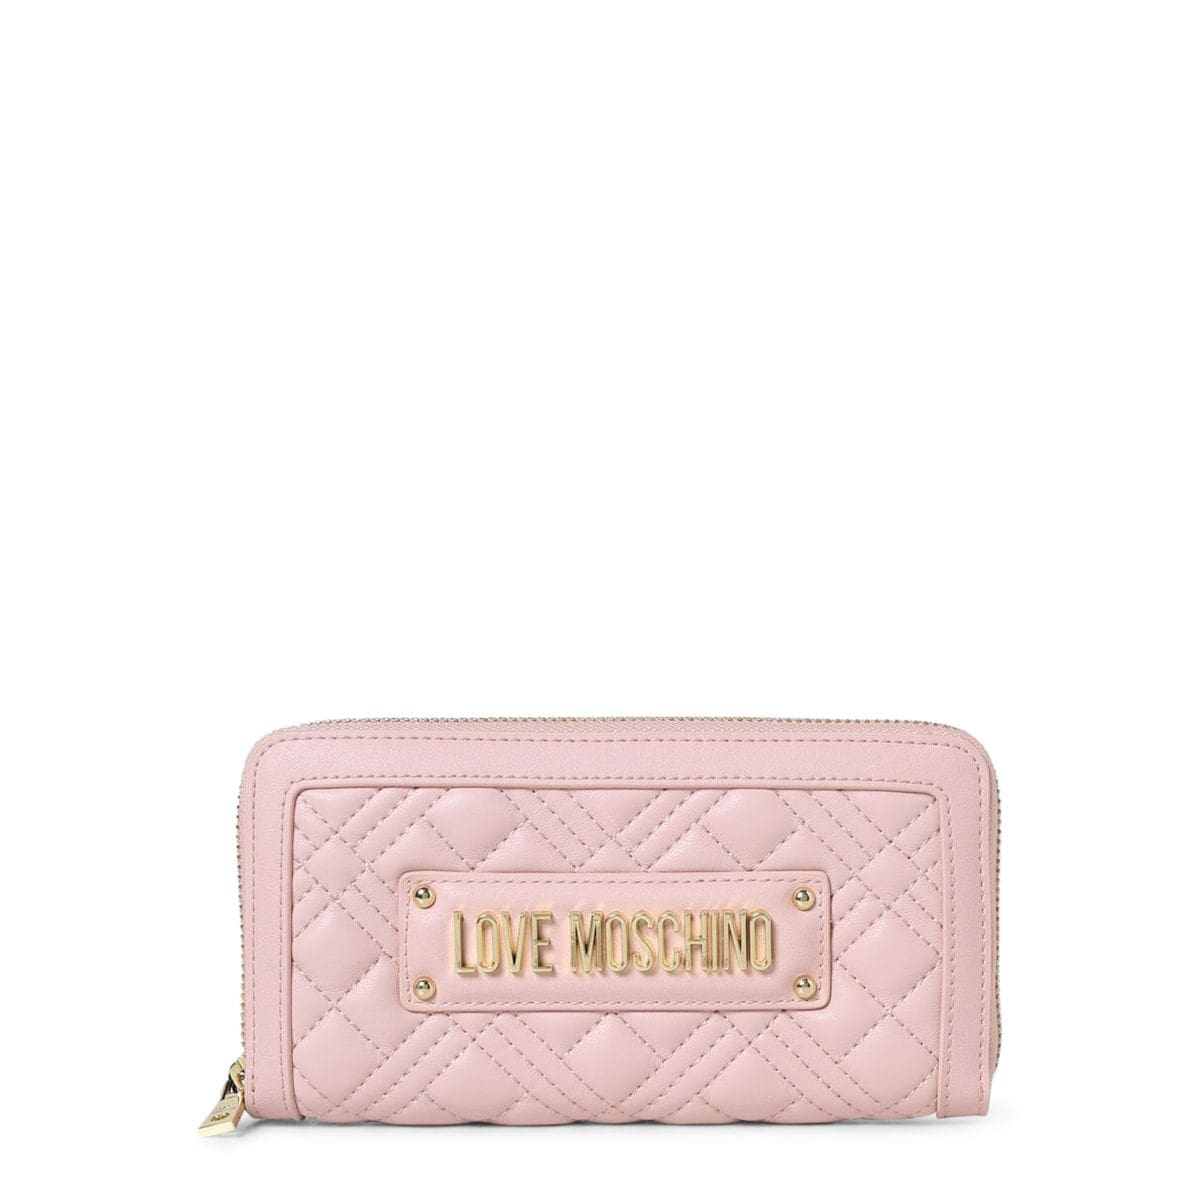 Love Moschino Wallet Pink